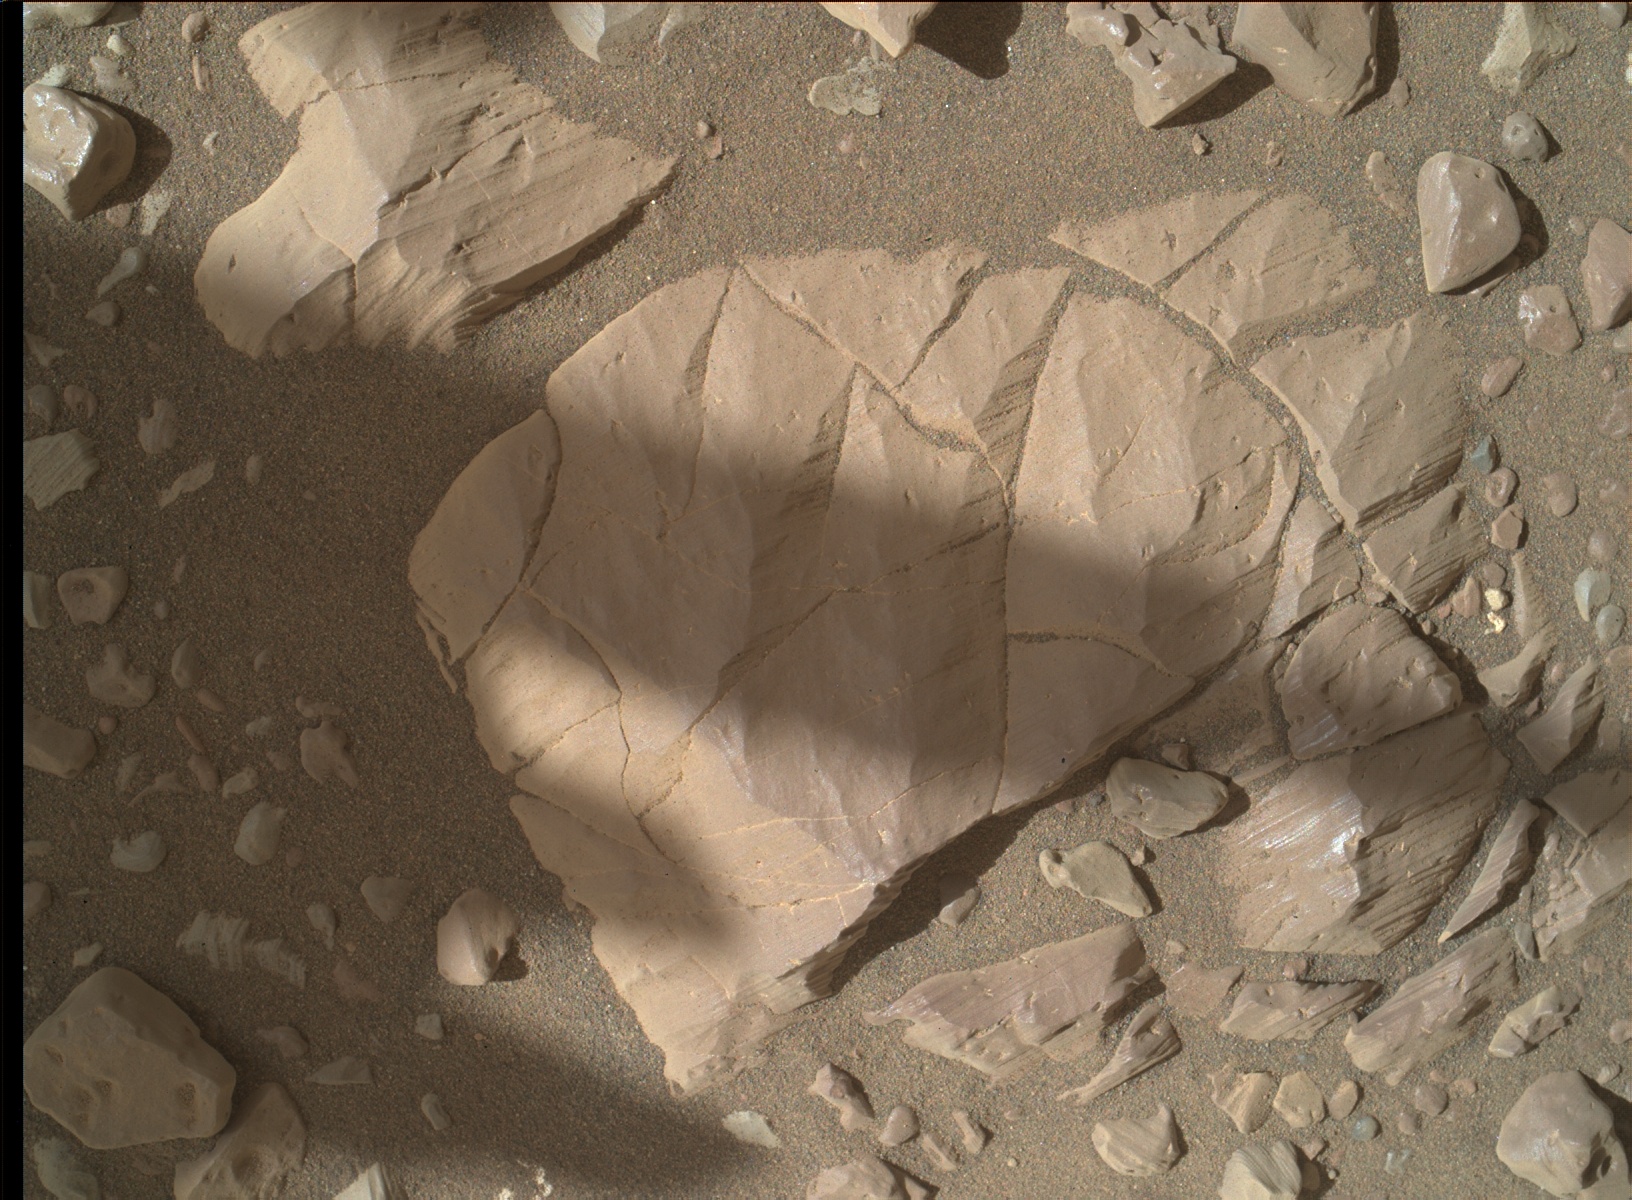 Nasa's Mars rover Curiosity acquired this image using its Mars Hand Lens Imager (MAHLI) on Sol 1897